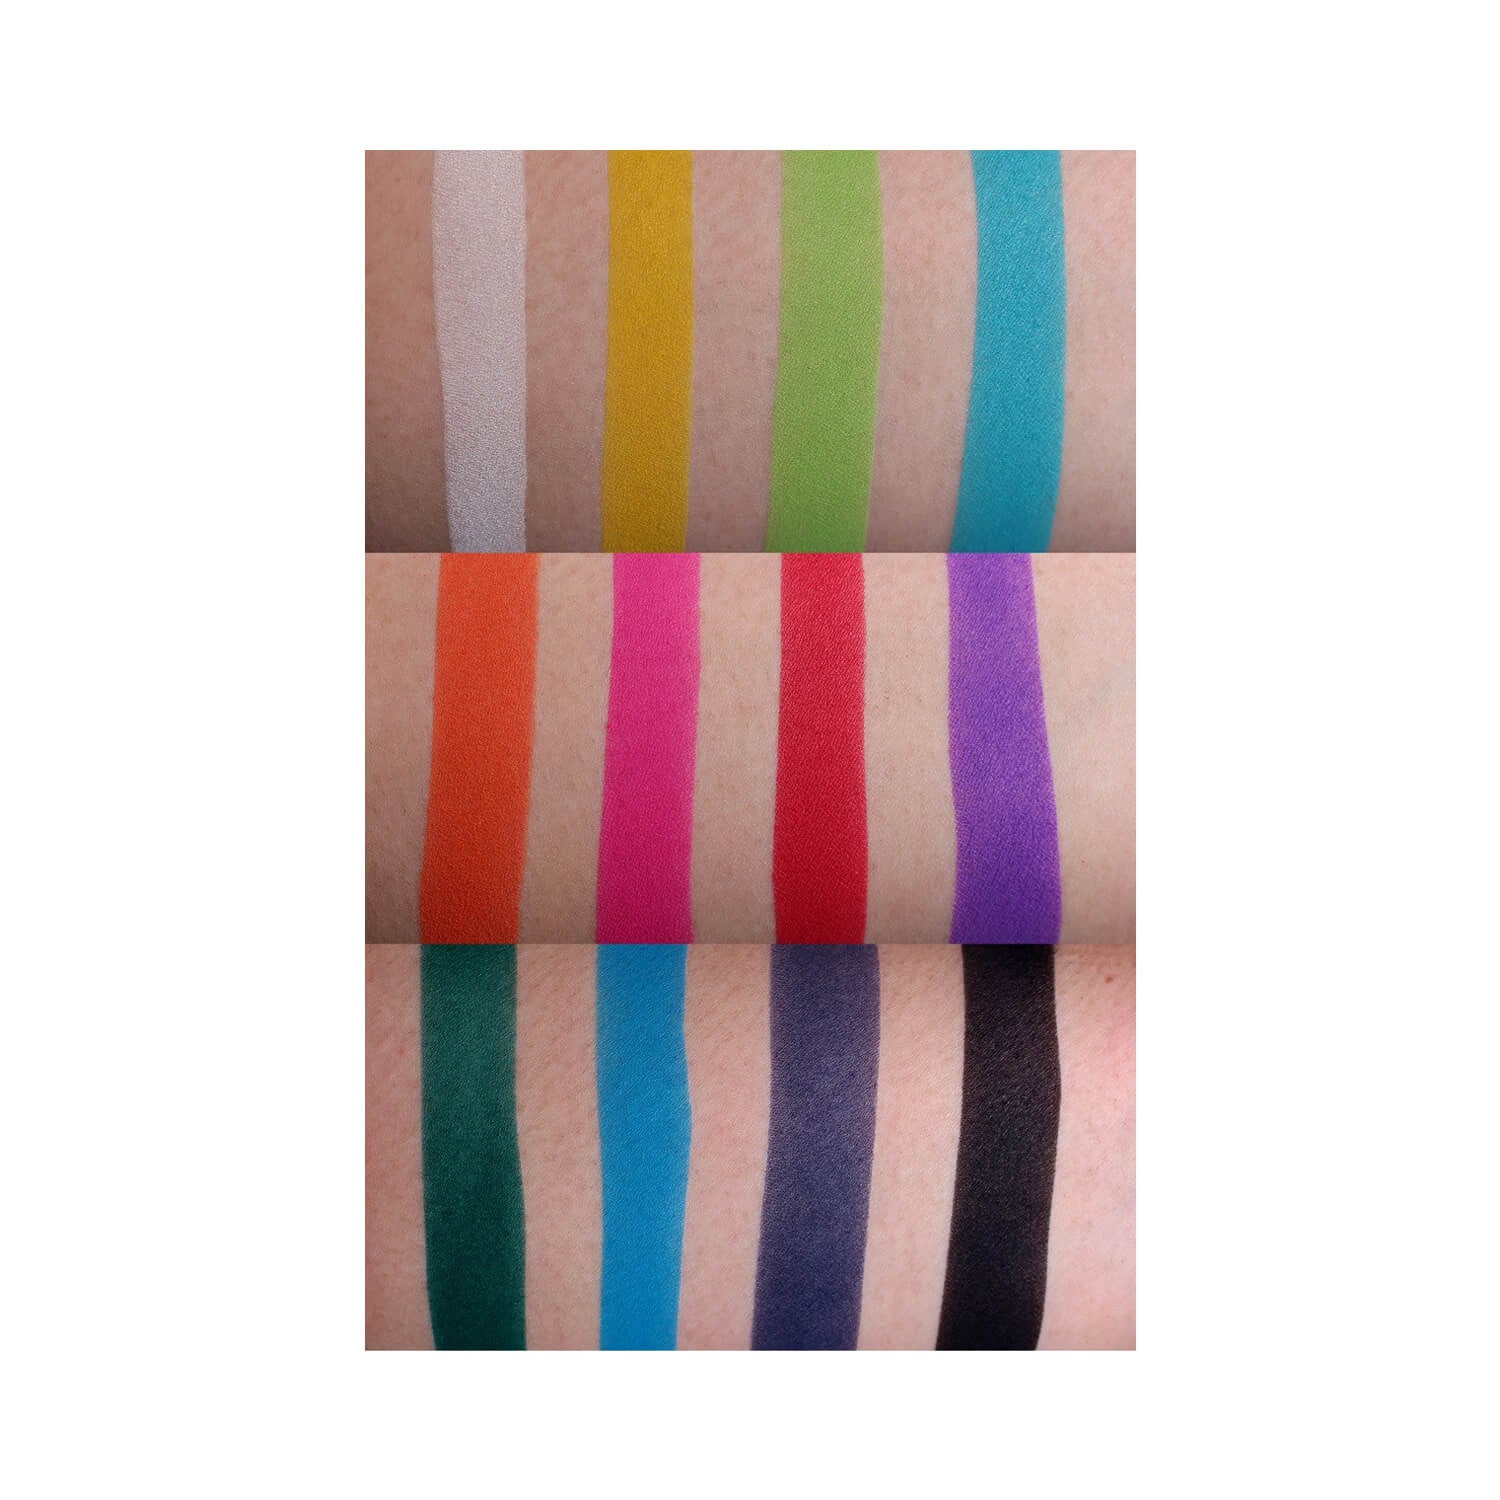 Morphe Cosmetics 12P Picasso Palette Pick Me Up Collection Swatches